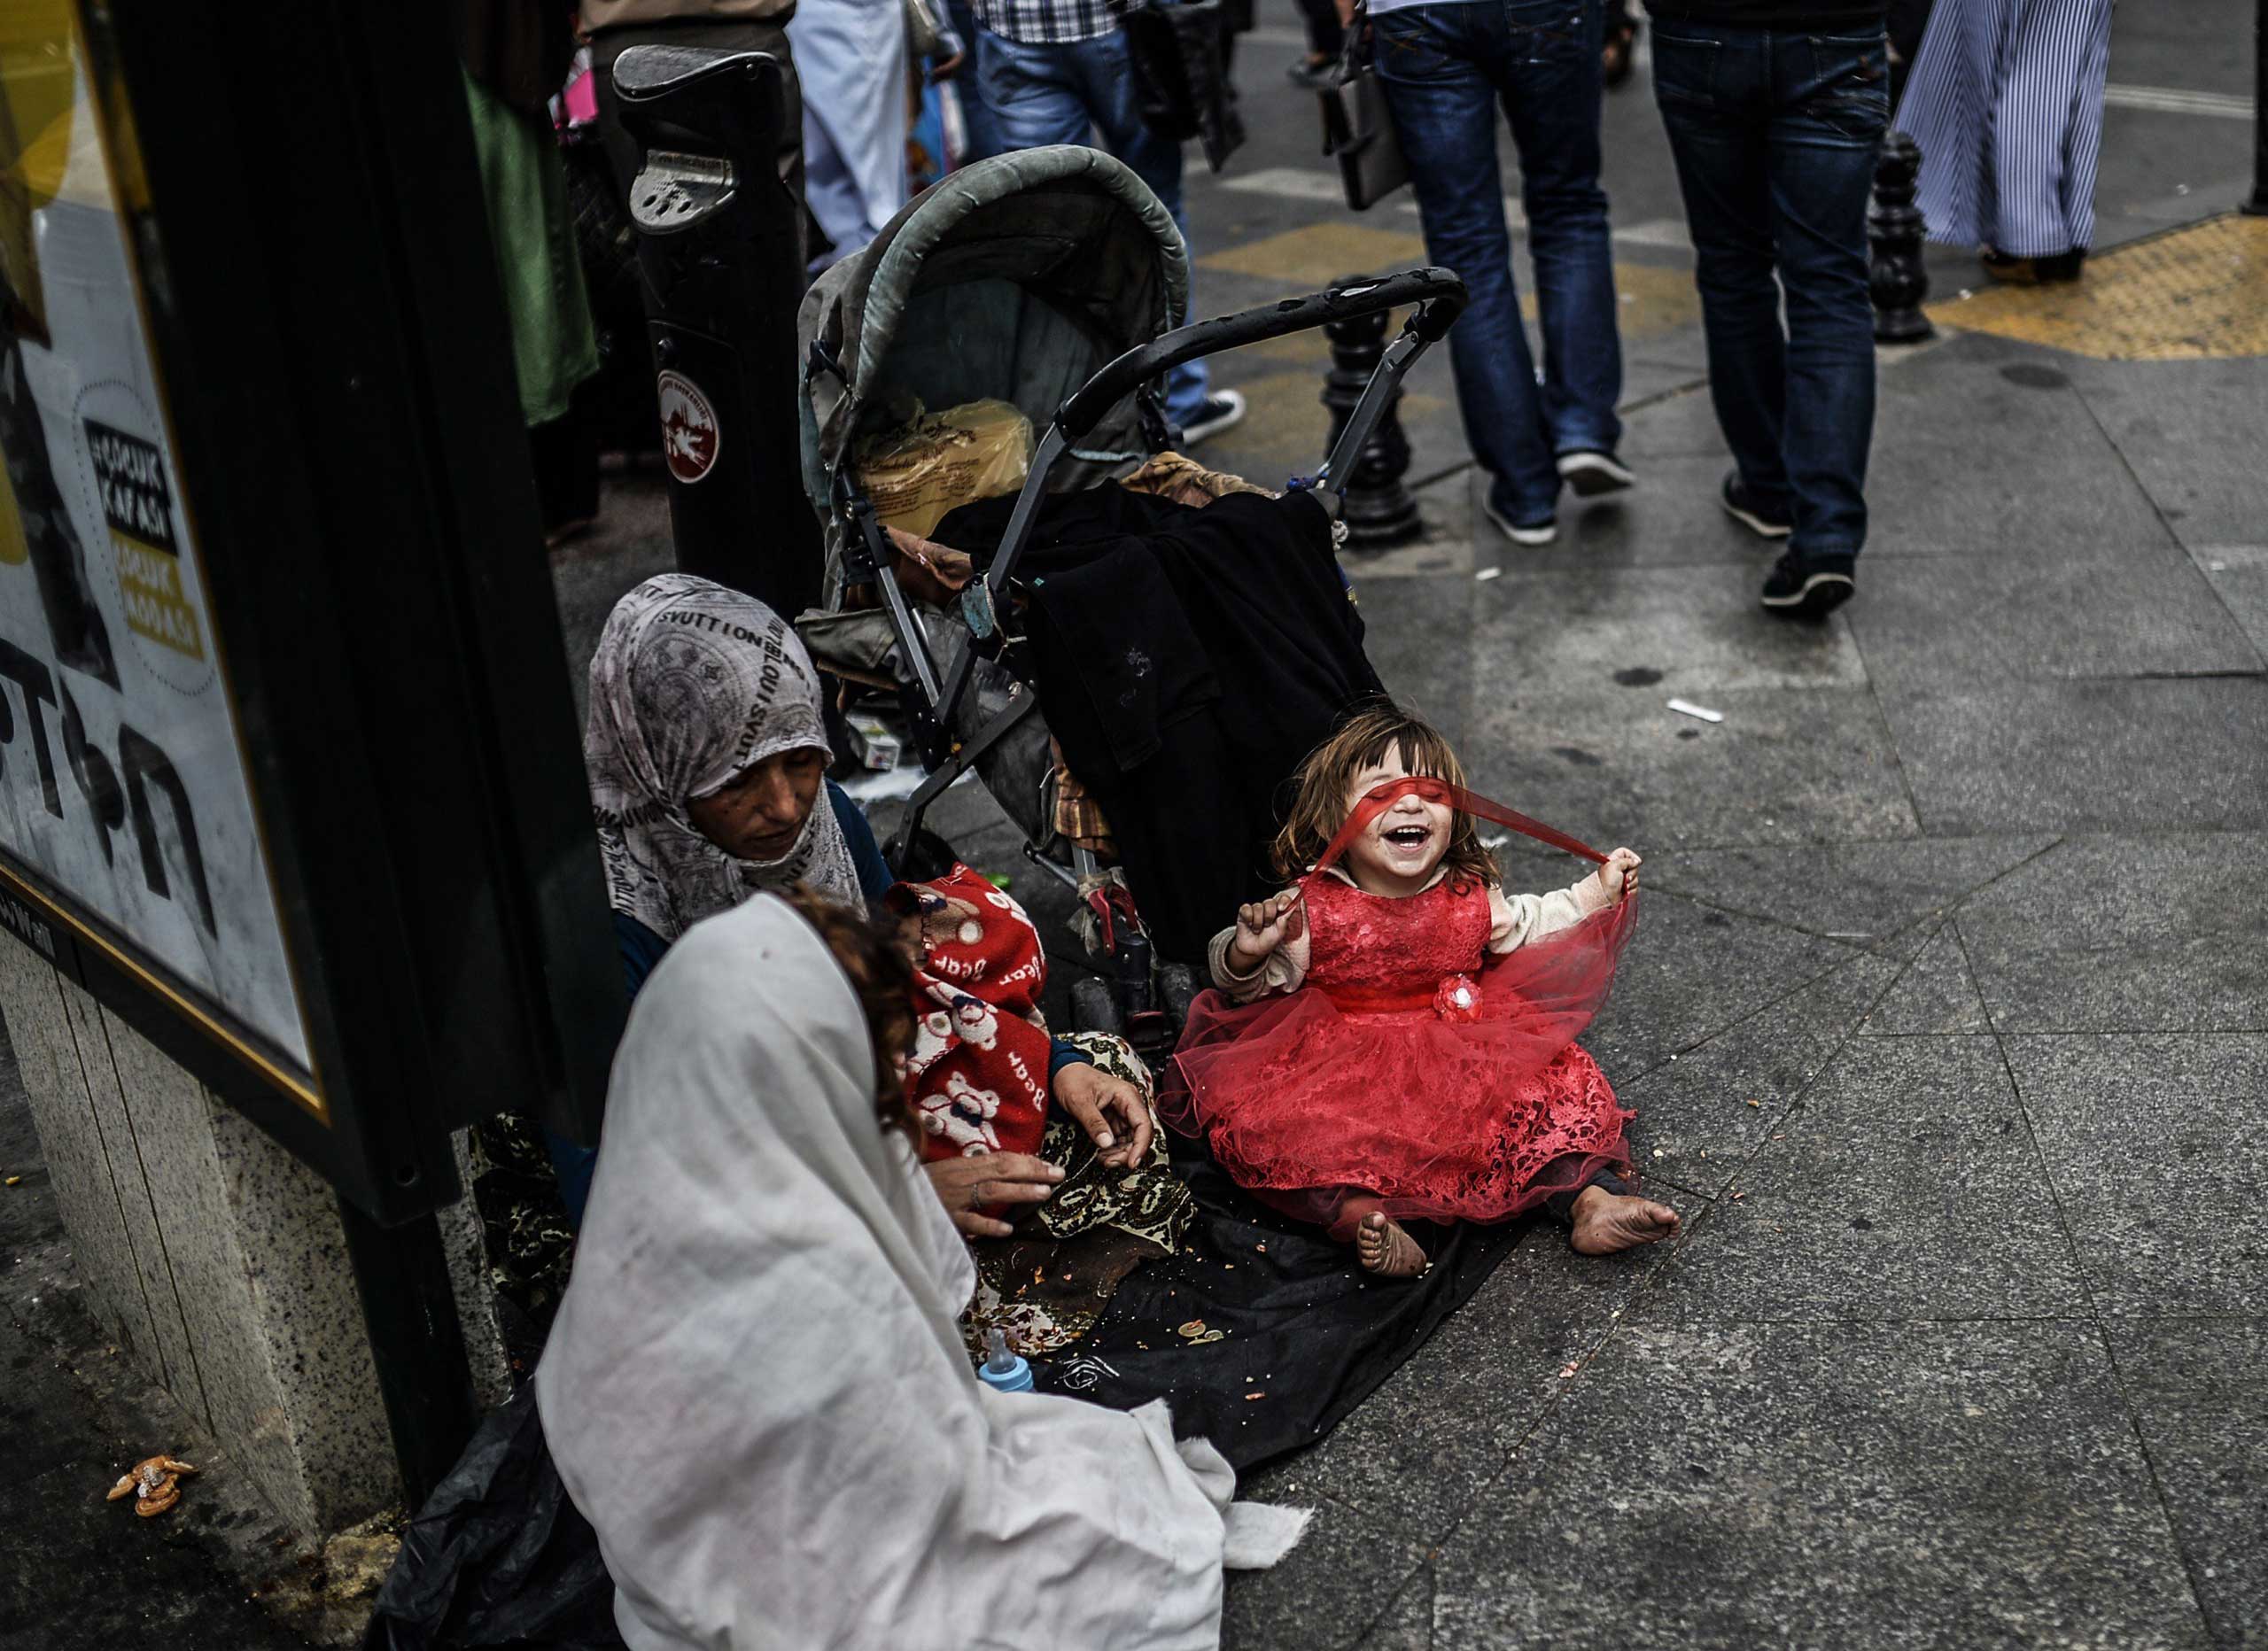 Sept. 17, 2014. A Syrian woman with her four children begs on the street in Istanbul.